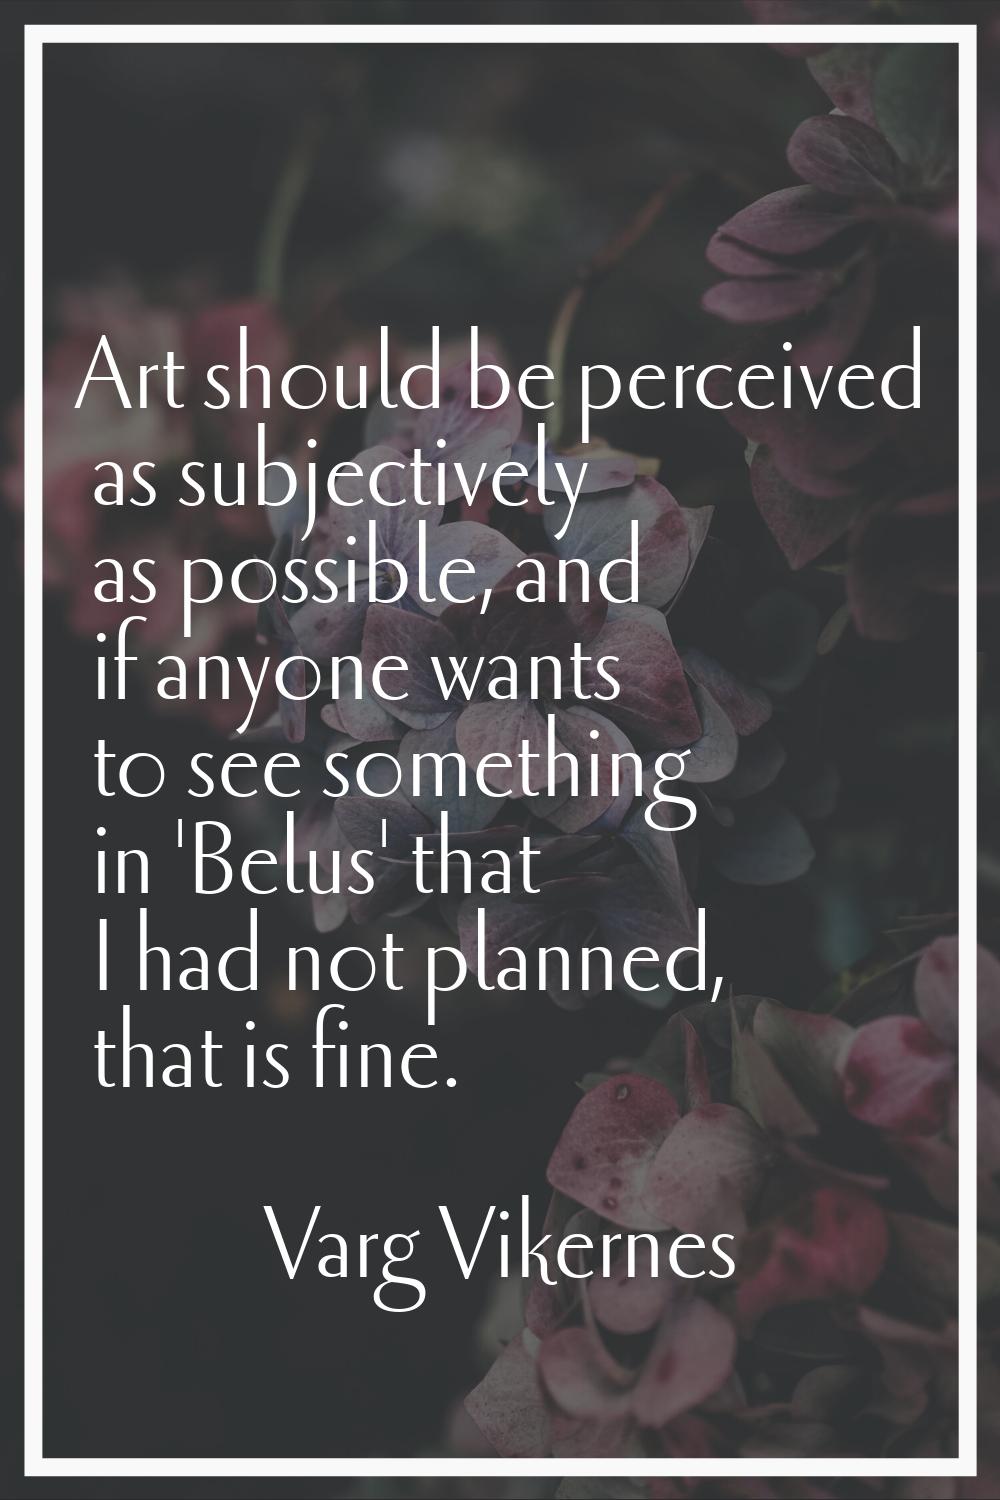 Art should be perceived as subjectively as possible, and if anyone wants to see something in 'Belus